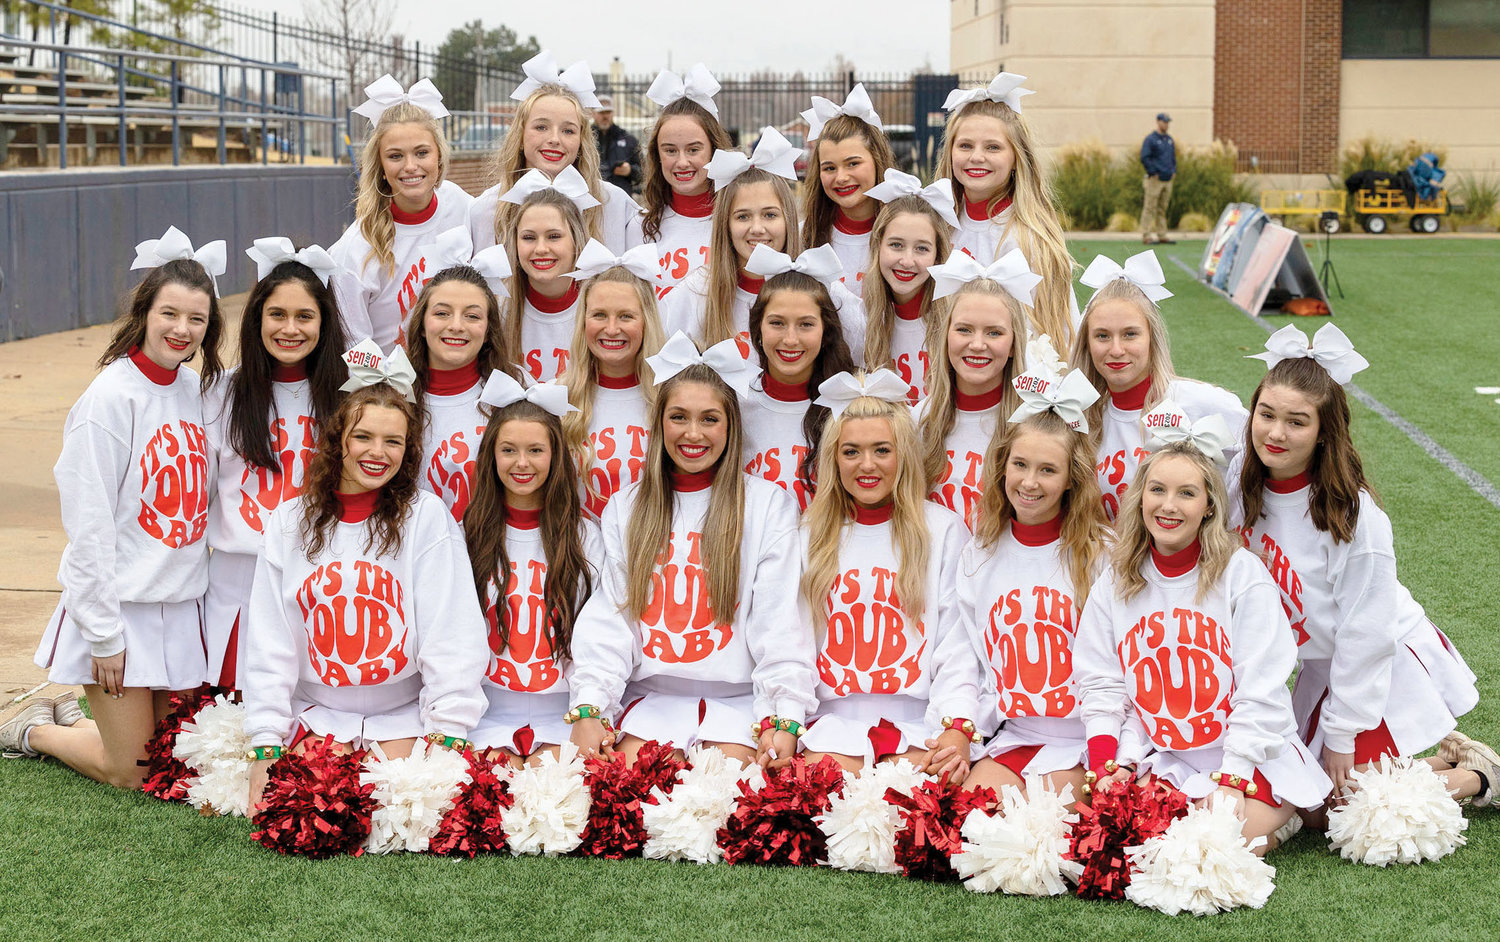 The Washington High School cheer team was all smiles before the Warriors’ championship game against Millwood Saturday. Washington defeated Millwood 17-14.